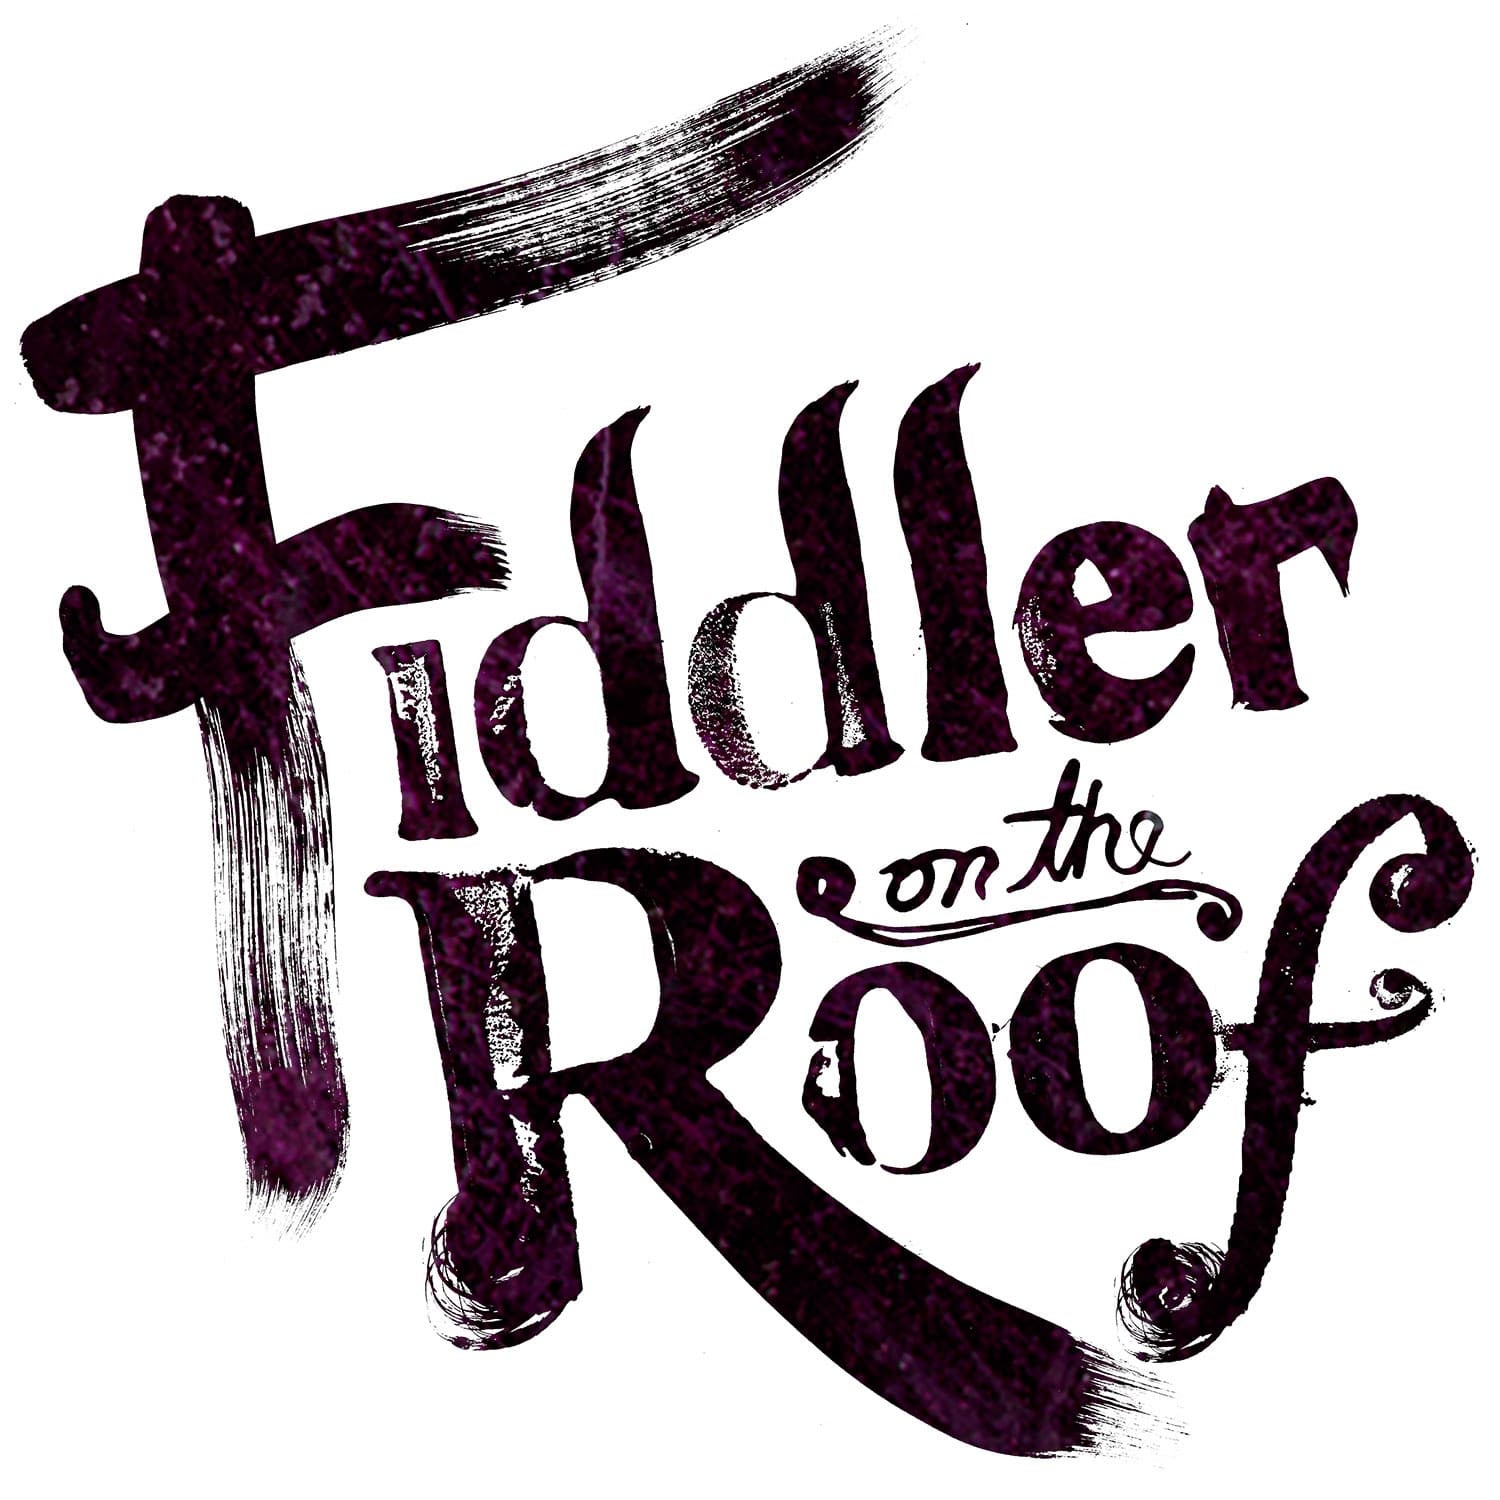 More Info for Fiddler on the Roof